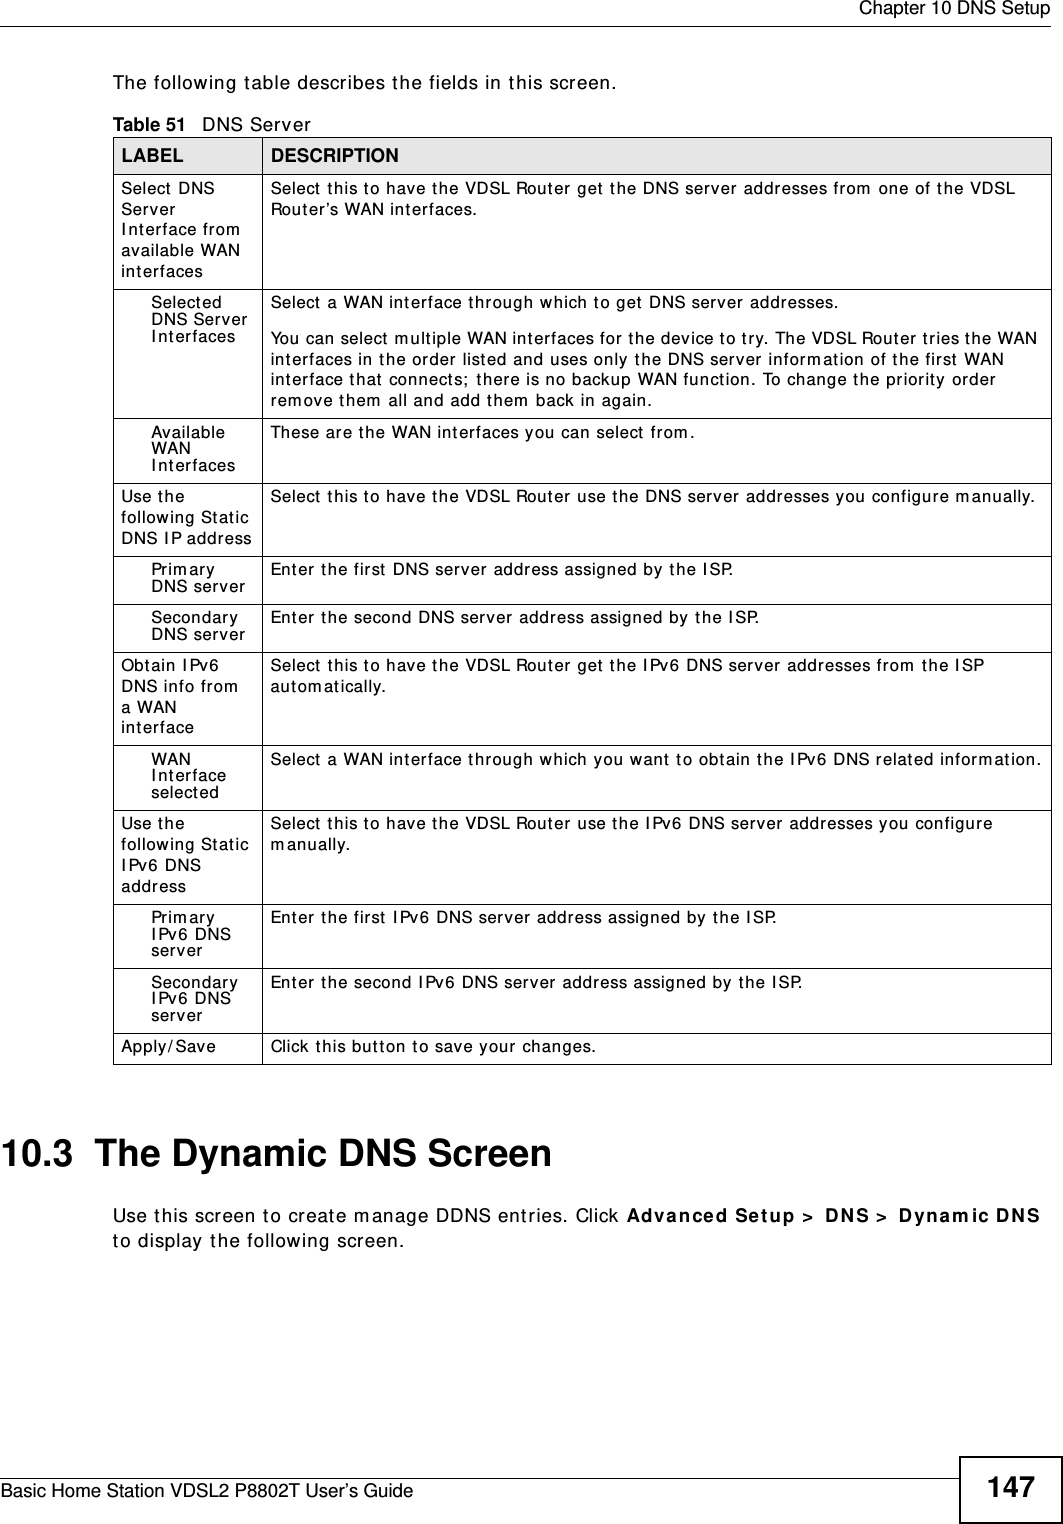  Chapter 10 DNS SetupBasic Home Station VDSL2 P8802T User’s Guide 147The following t able describes t he fields in this screen. 10.3  The Dynamic DNS ScreenUse t his screen t o creat e m anage DDNS ent ries. Click Advance d Se t up &gt;  DNS &gt;  D yn am ic DNS to display the following screen.Table 51   DNS ServerLABEL DESCRIPTIONSelect  DNS Server I nter face fr om  available WAN int erfacesSelect t his to have t he VDSL Rout er get  the DNS server  addresses from  one of the VDSL Rout er’s WAN interfaces. Select ed DNS Server I nter facesSelect  a WAN int erface t hrough which to get  DNS server addresses.You can select  multiple WAN int erfaces for t he device t o t ry. The VDSL Rout er t ries t he WAN int erfaces in the order listed and uses only t he DNS server  inform at ion of the first  WAN int erface t hat  connect s;  there is no backup WAN funct ion. To change the pr iorit y order rem ove t hem  all and add t hem  back in again. Av ailable WAN I nter facesThese are t he WAN int er faces you can select  from .Use t he following Stat ic DNS I P addressSelect  this to have t he VDSL Rout er use the DNS server addresses you configure m anually.Prim ar y DNS ser verEnter  t he first  DNS server address assigned by the I SP.Secondary DNS ser verEnter  t he second DNS server address assigned by the I SP.Obtain I Pv6 DNS info from  a WAN int erfaceSelect  this to have the VDSL Rout er get  t he I Pv6 DNS server addresses from  t he I SP aut om atically.WAN I nterface selectedSelect a WAN int erface through w hich you want to obtain the I Pv6 DNS related inform at ion.Use t he following Stat ic I Pv6 DNS addressSelect  this to have t he VDSL Router use the I Pv 6 DNS server addresses you configure m anually.Prim ar y I Pv6 DNS ser verEnter  t he first  I Pv 6 DNS server address assigned by the I SP.Secondary I Pv6 DNS ser verEnter t he second IPv 6 DNS server address assigned by the I SP.Apply/ Save Click this but t on to save your changes.